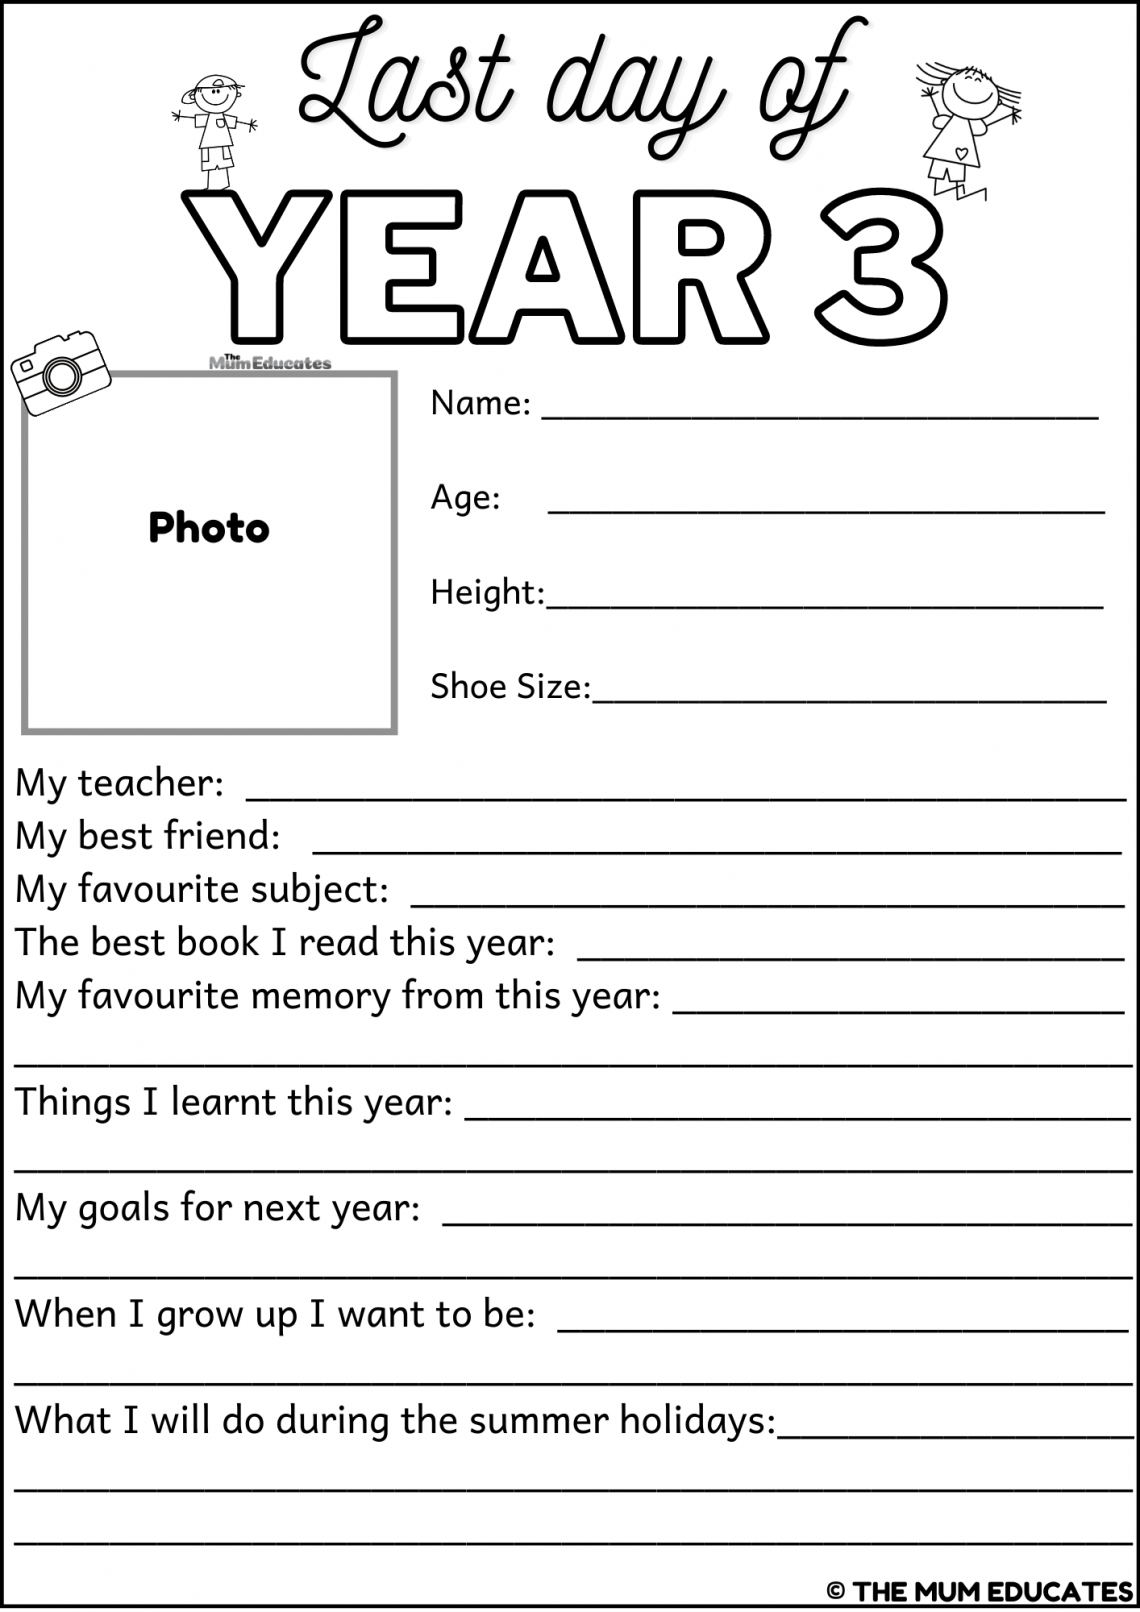 free-printable-last-day-of-school-interview-the-mum-educates